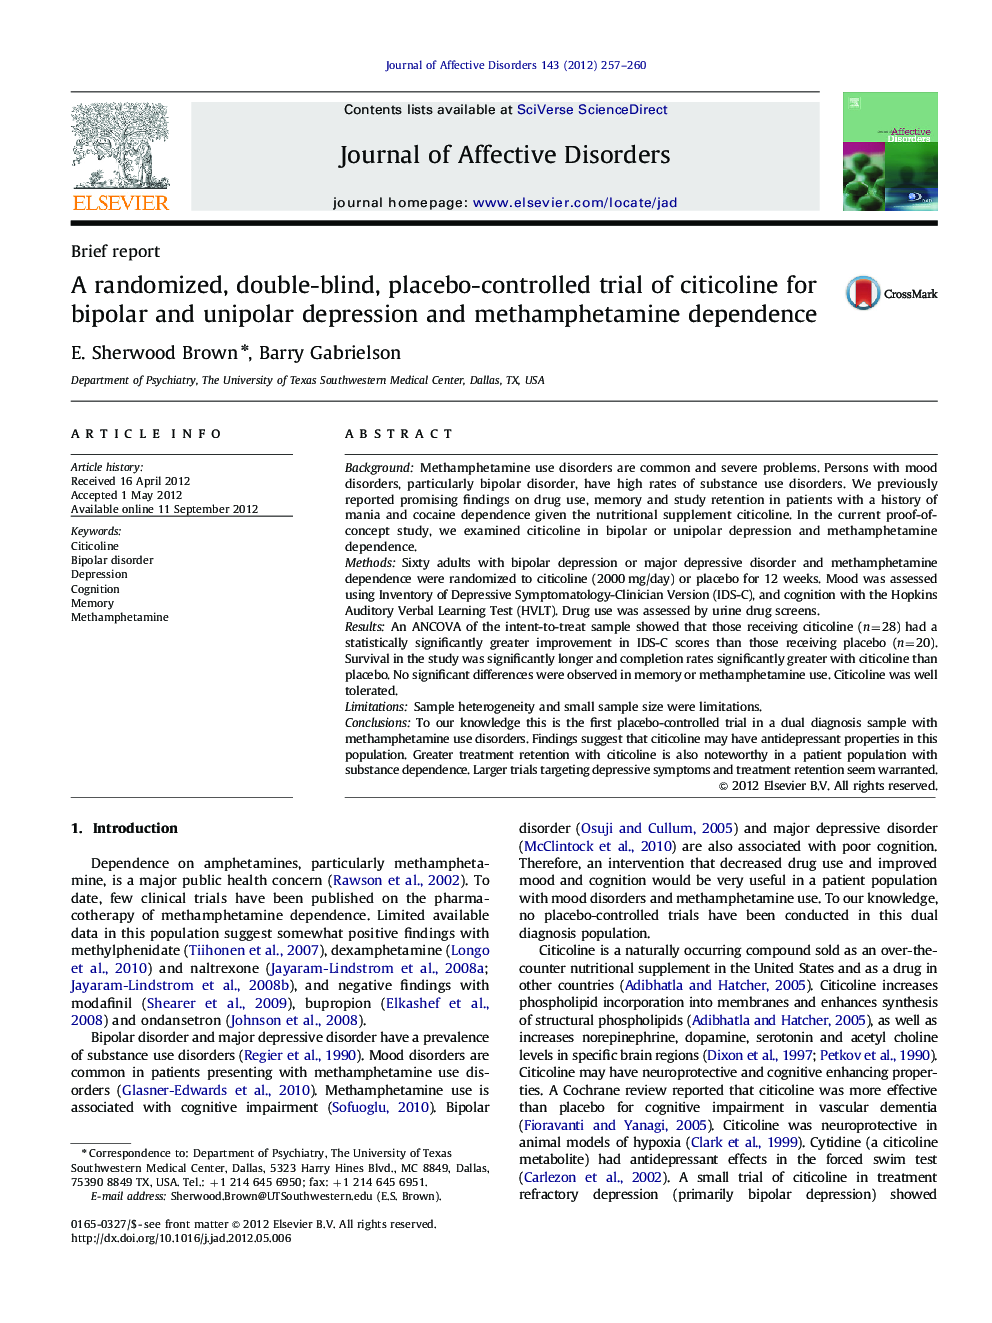 A randomized, double-blind, placebo-controlled trial of citicoline for bipolar and unipolar depression and methamphetamine dependence